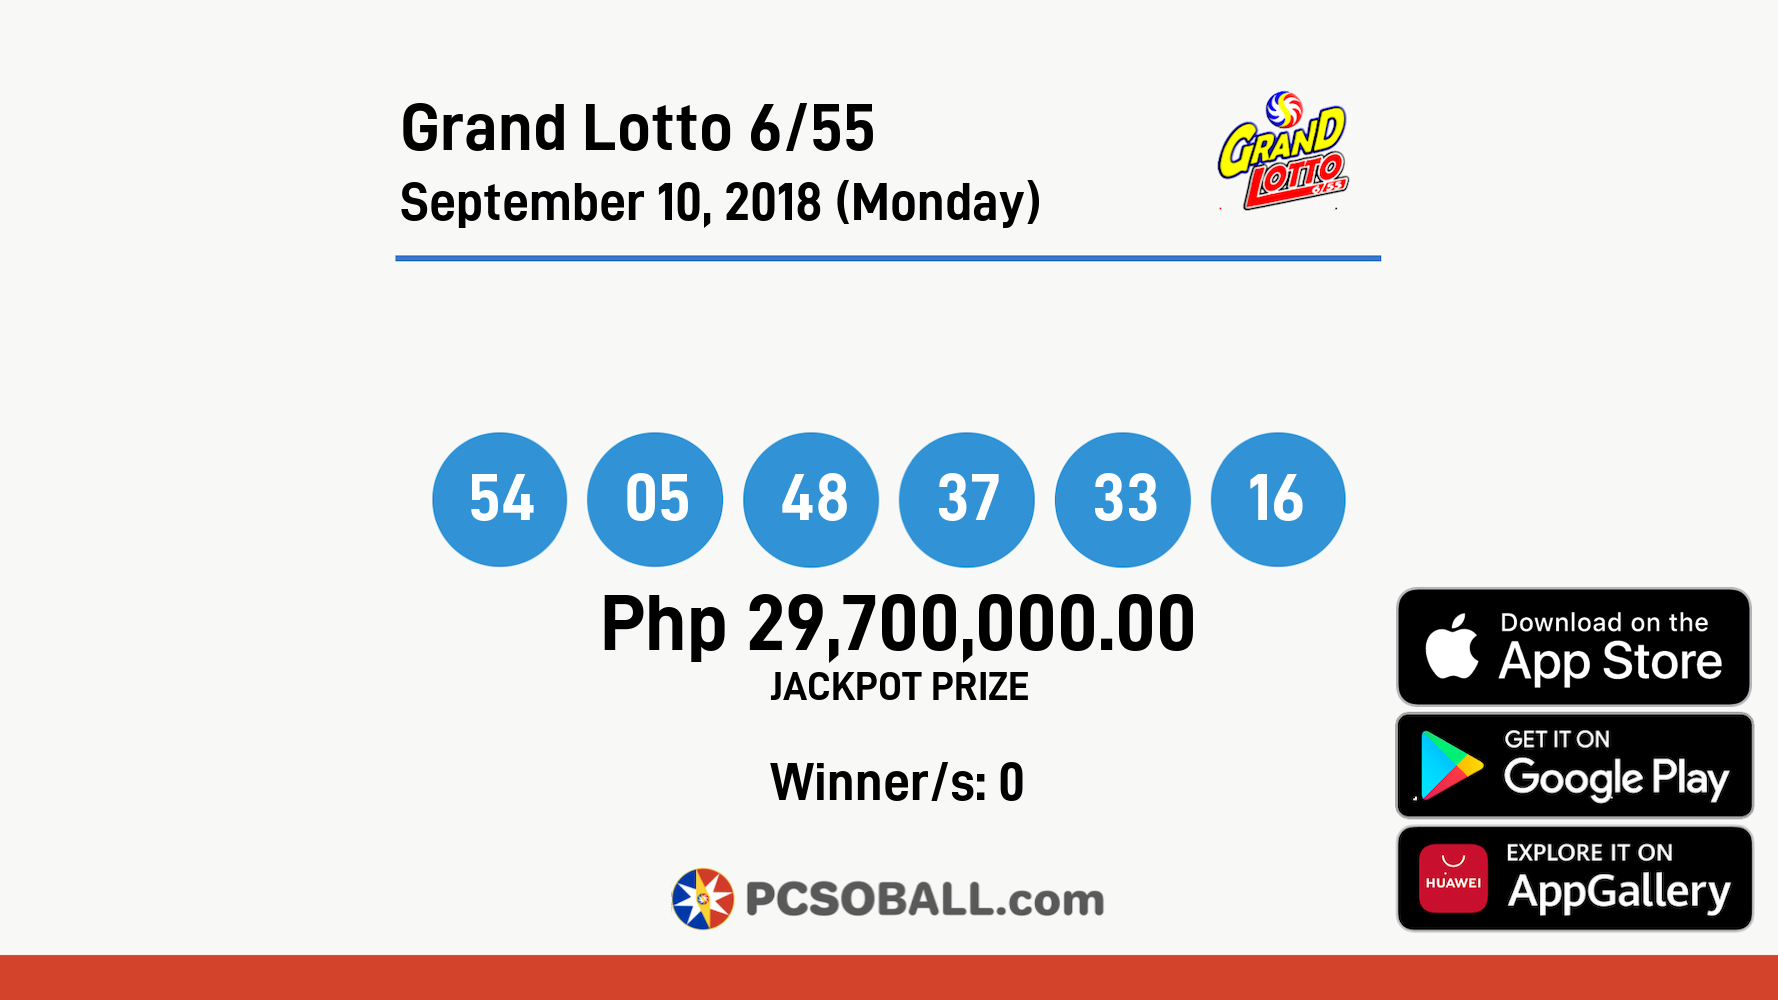 Grand Lotto 6/55 September 10, 2018 (Monday) Result